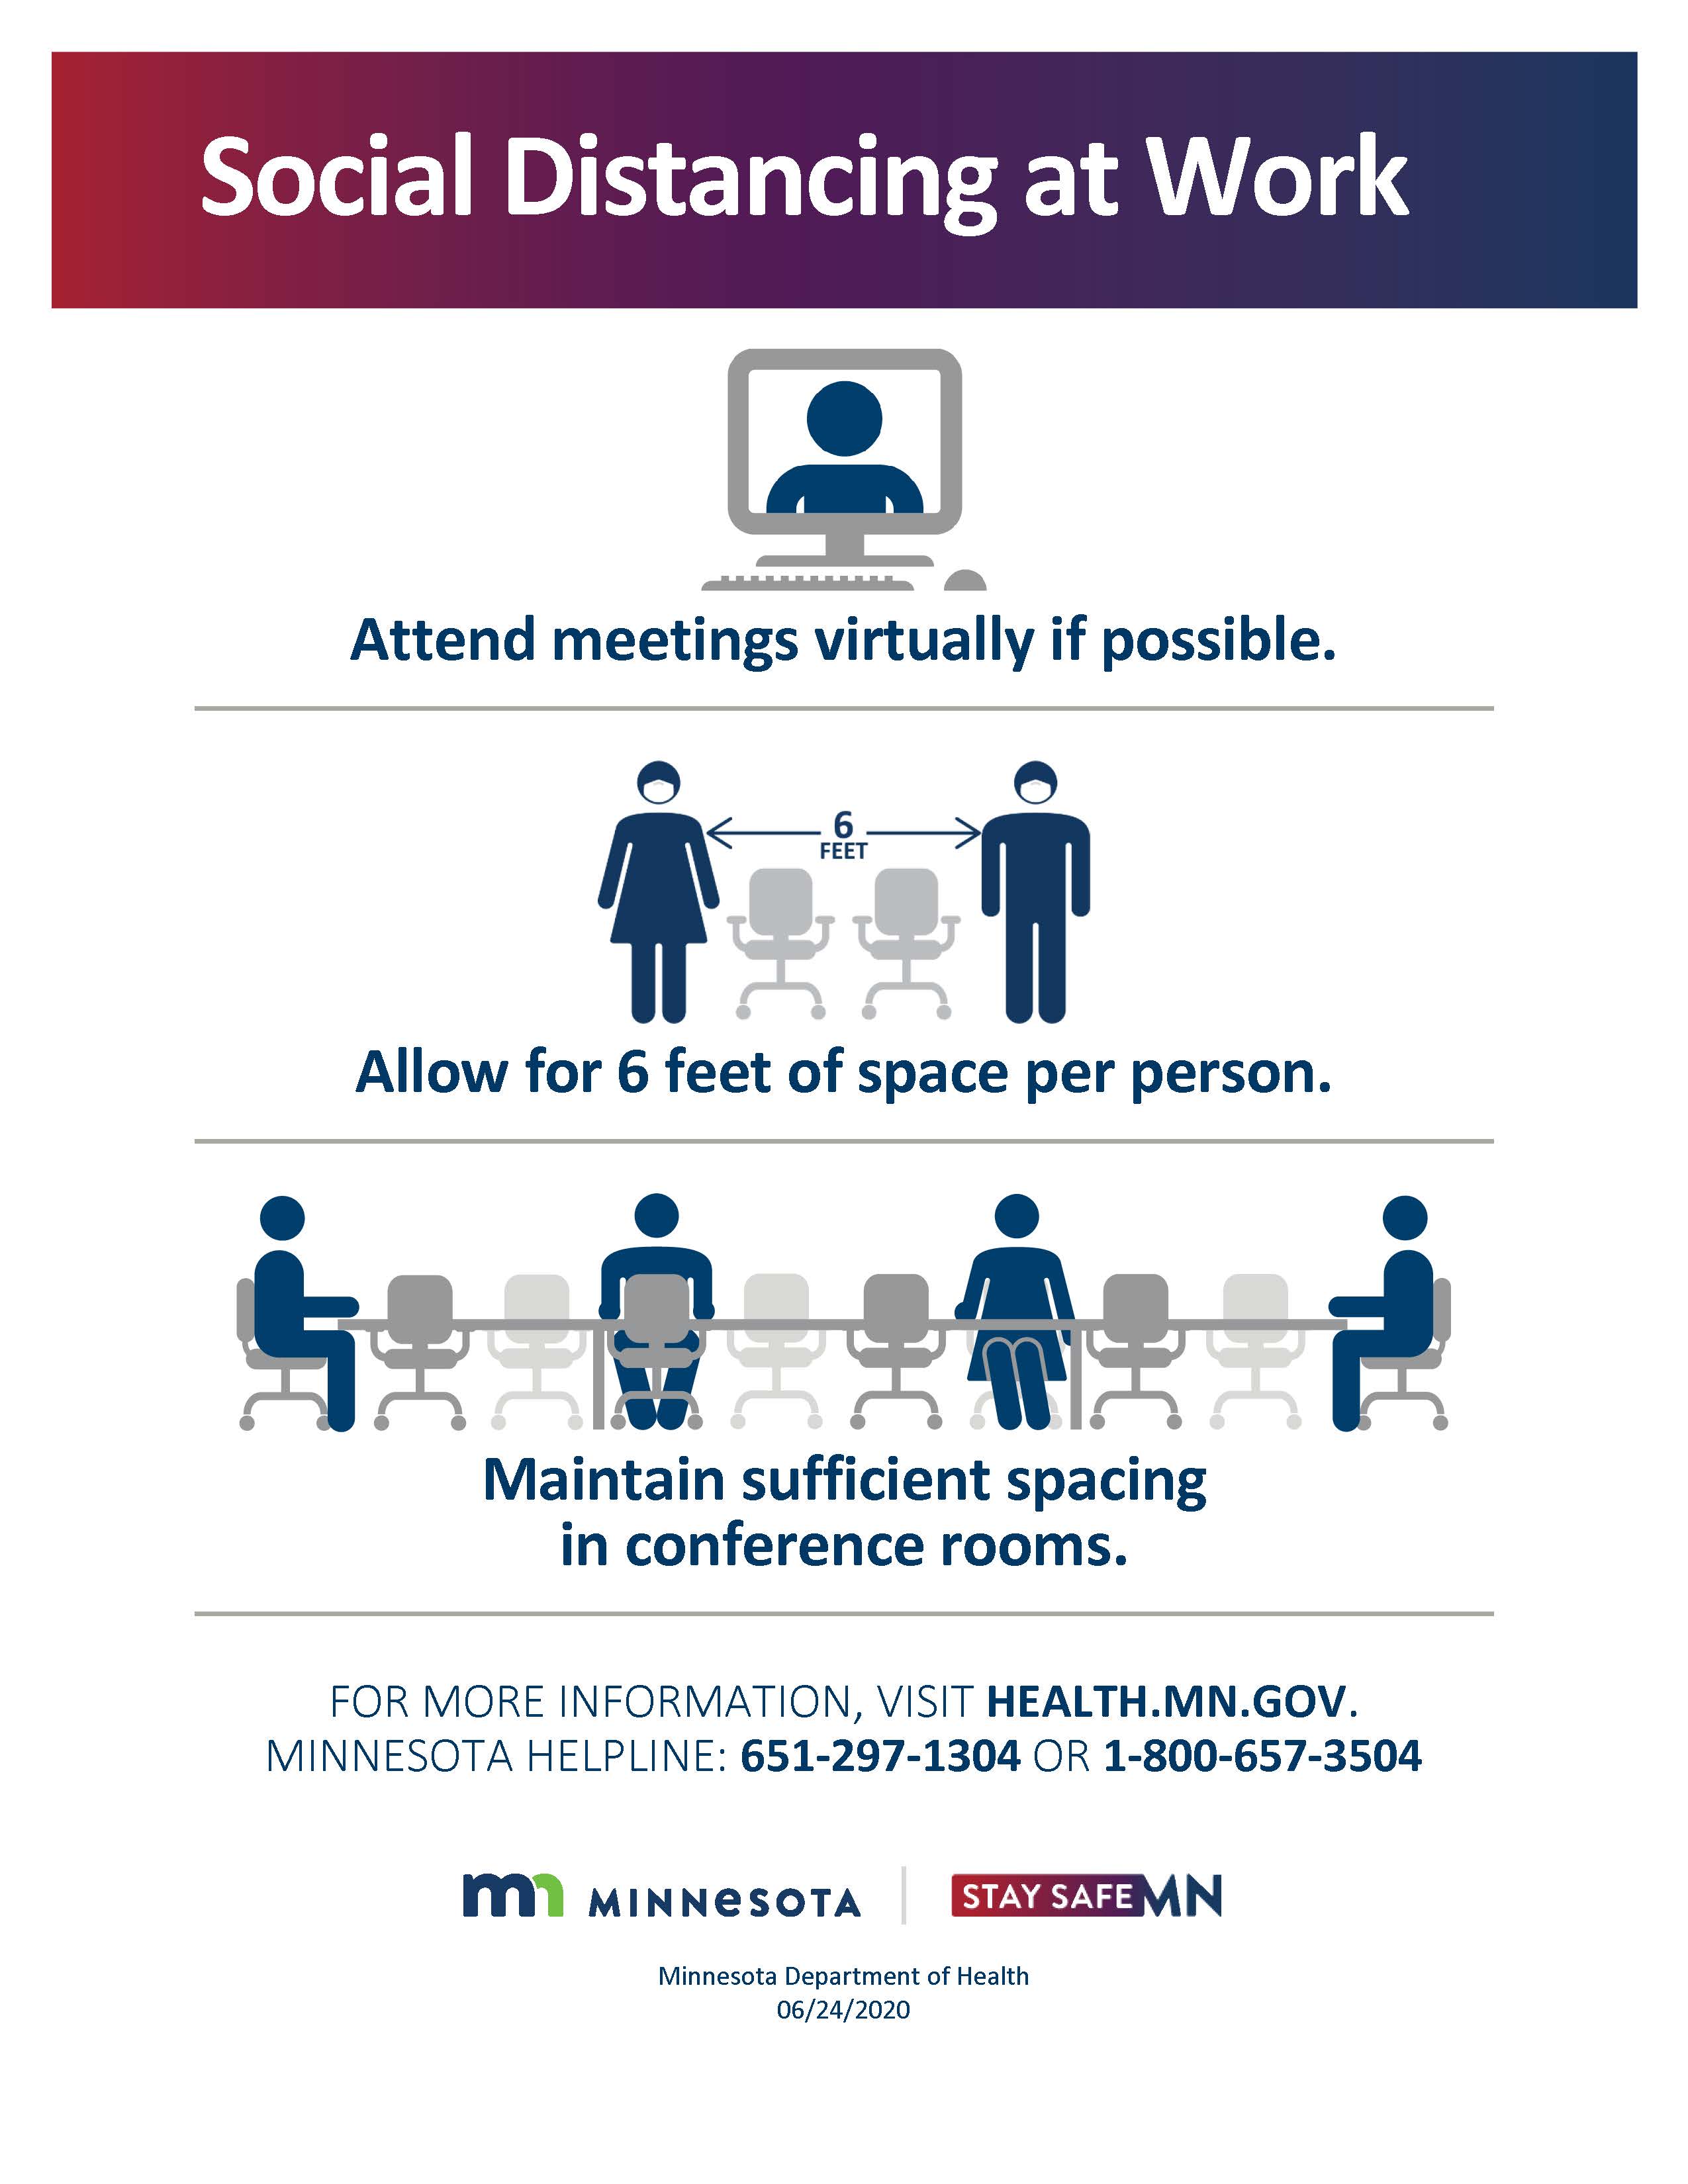 Social distance at work, including attending meetings virtually if possible, allowing six feet of separation between individuals while at work, and maintaining that six-foot spacing during in-person meetings. Visit health.mn.gov for more information.